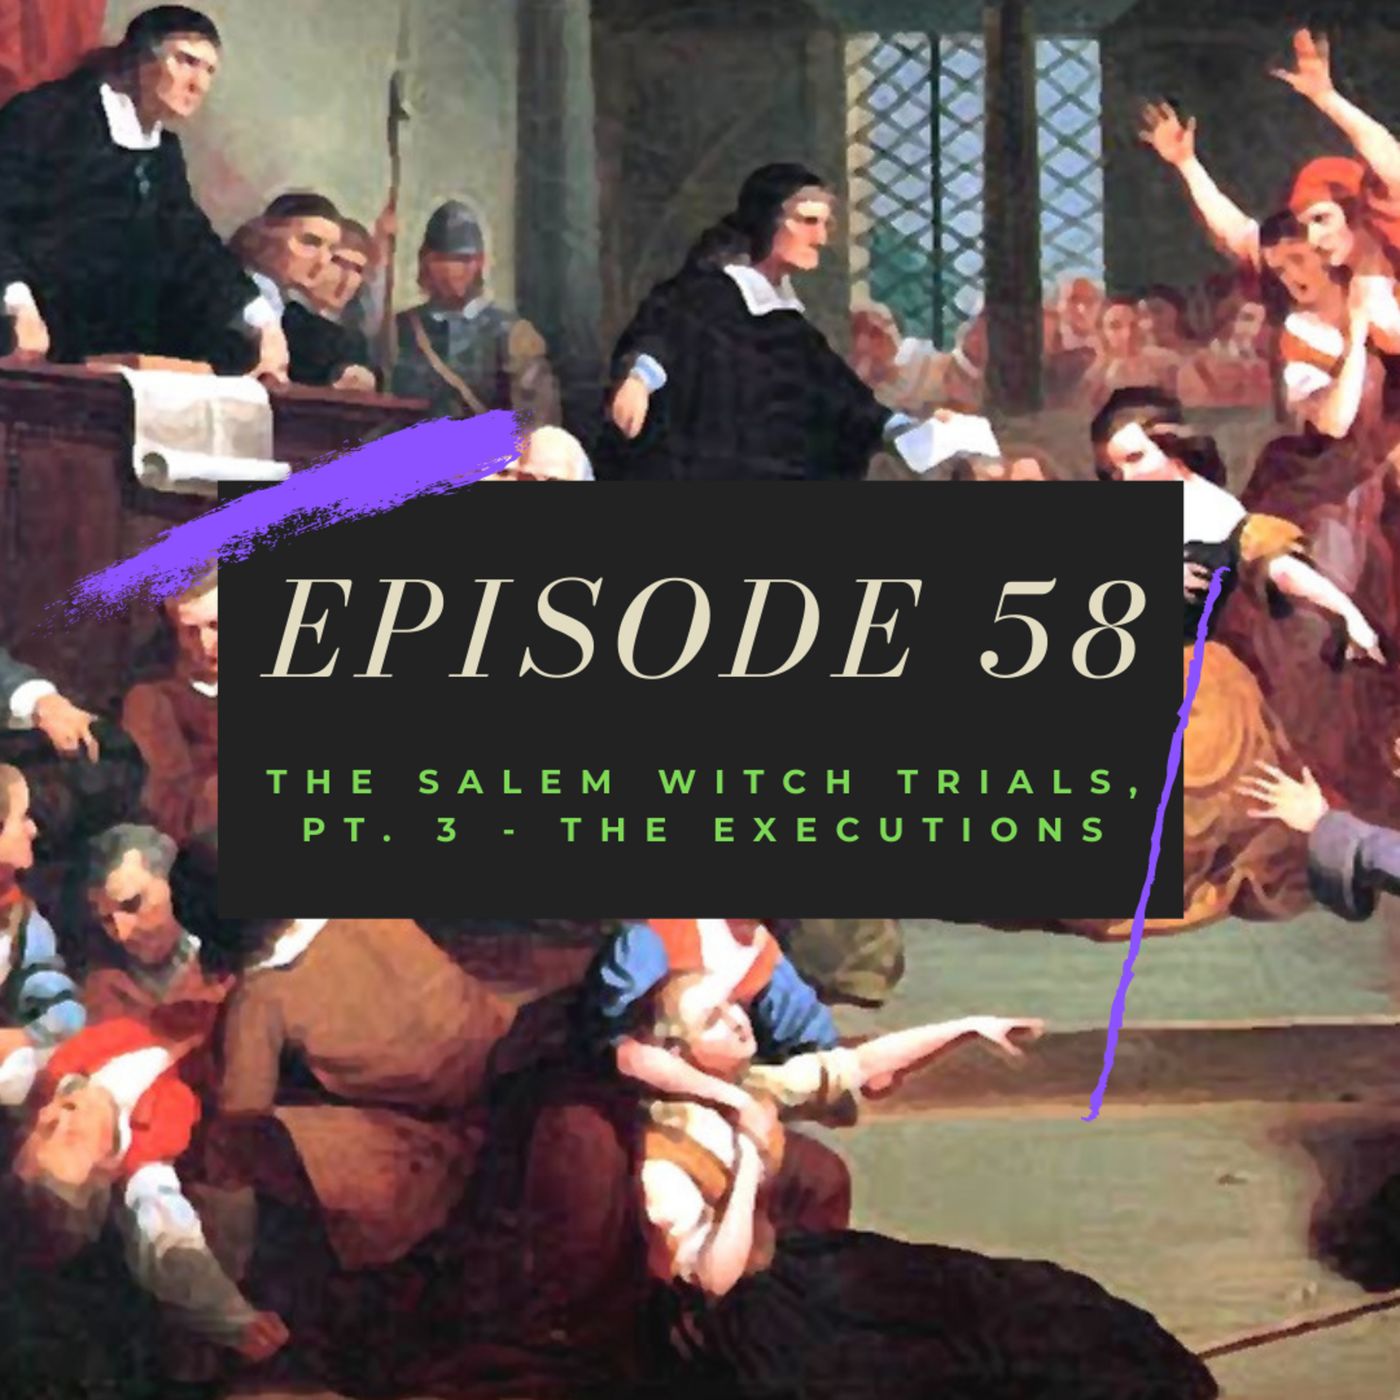 Ep. 58: The Salem Witch Trials, Pt. 3 - The Executions Image